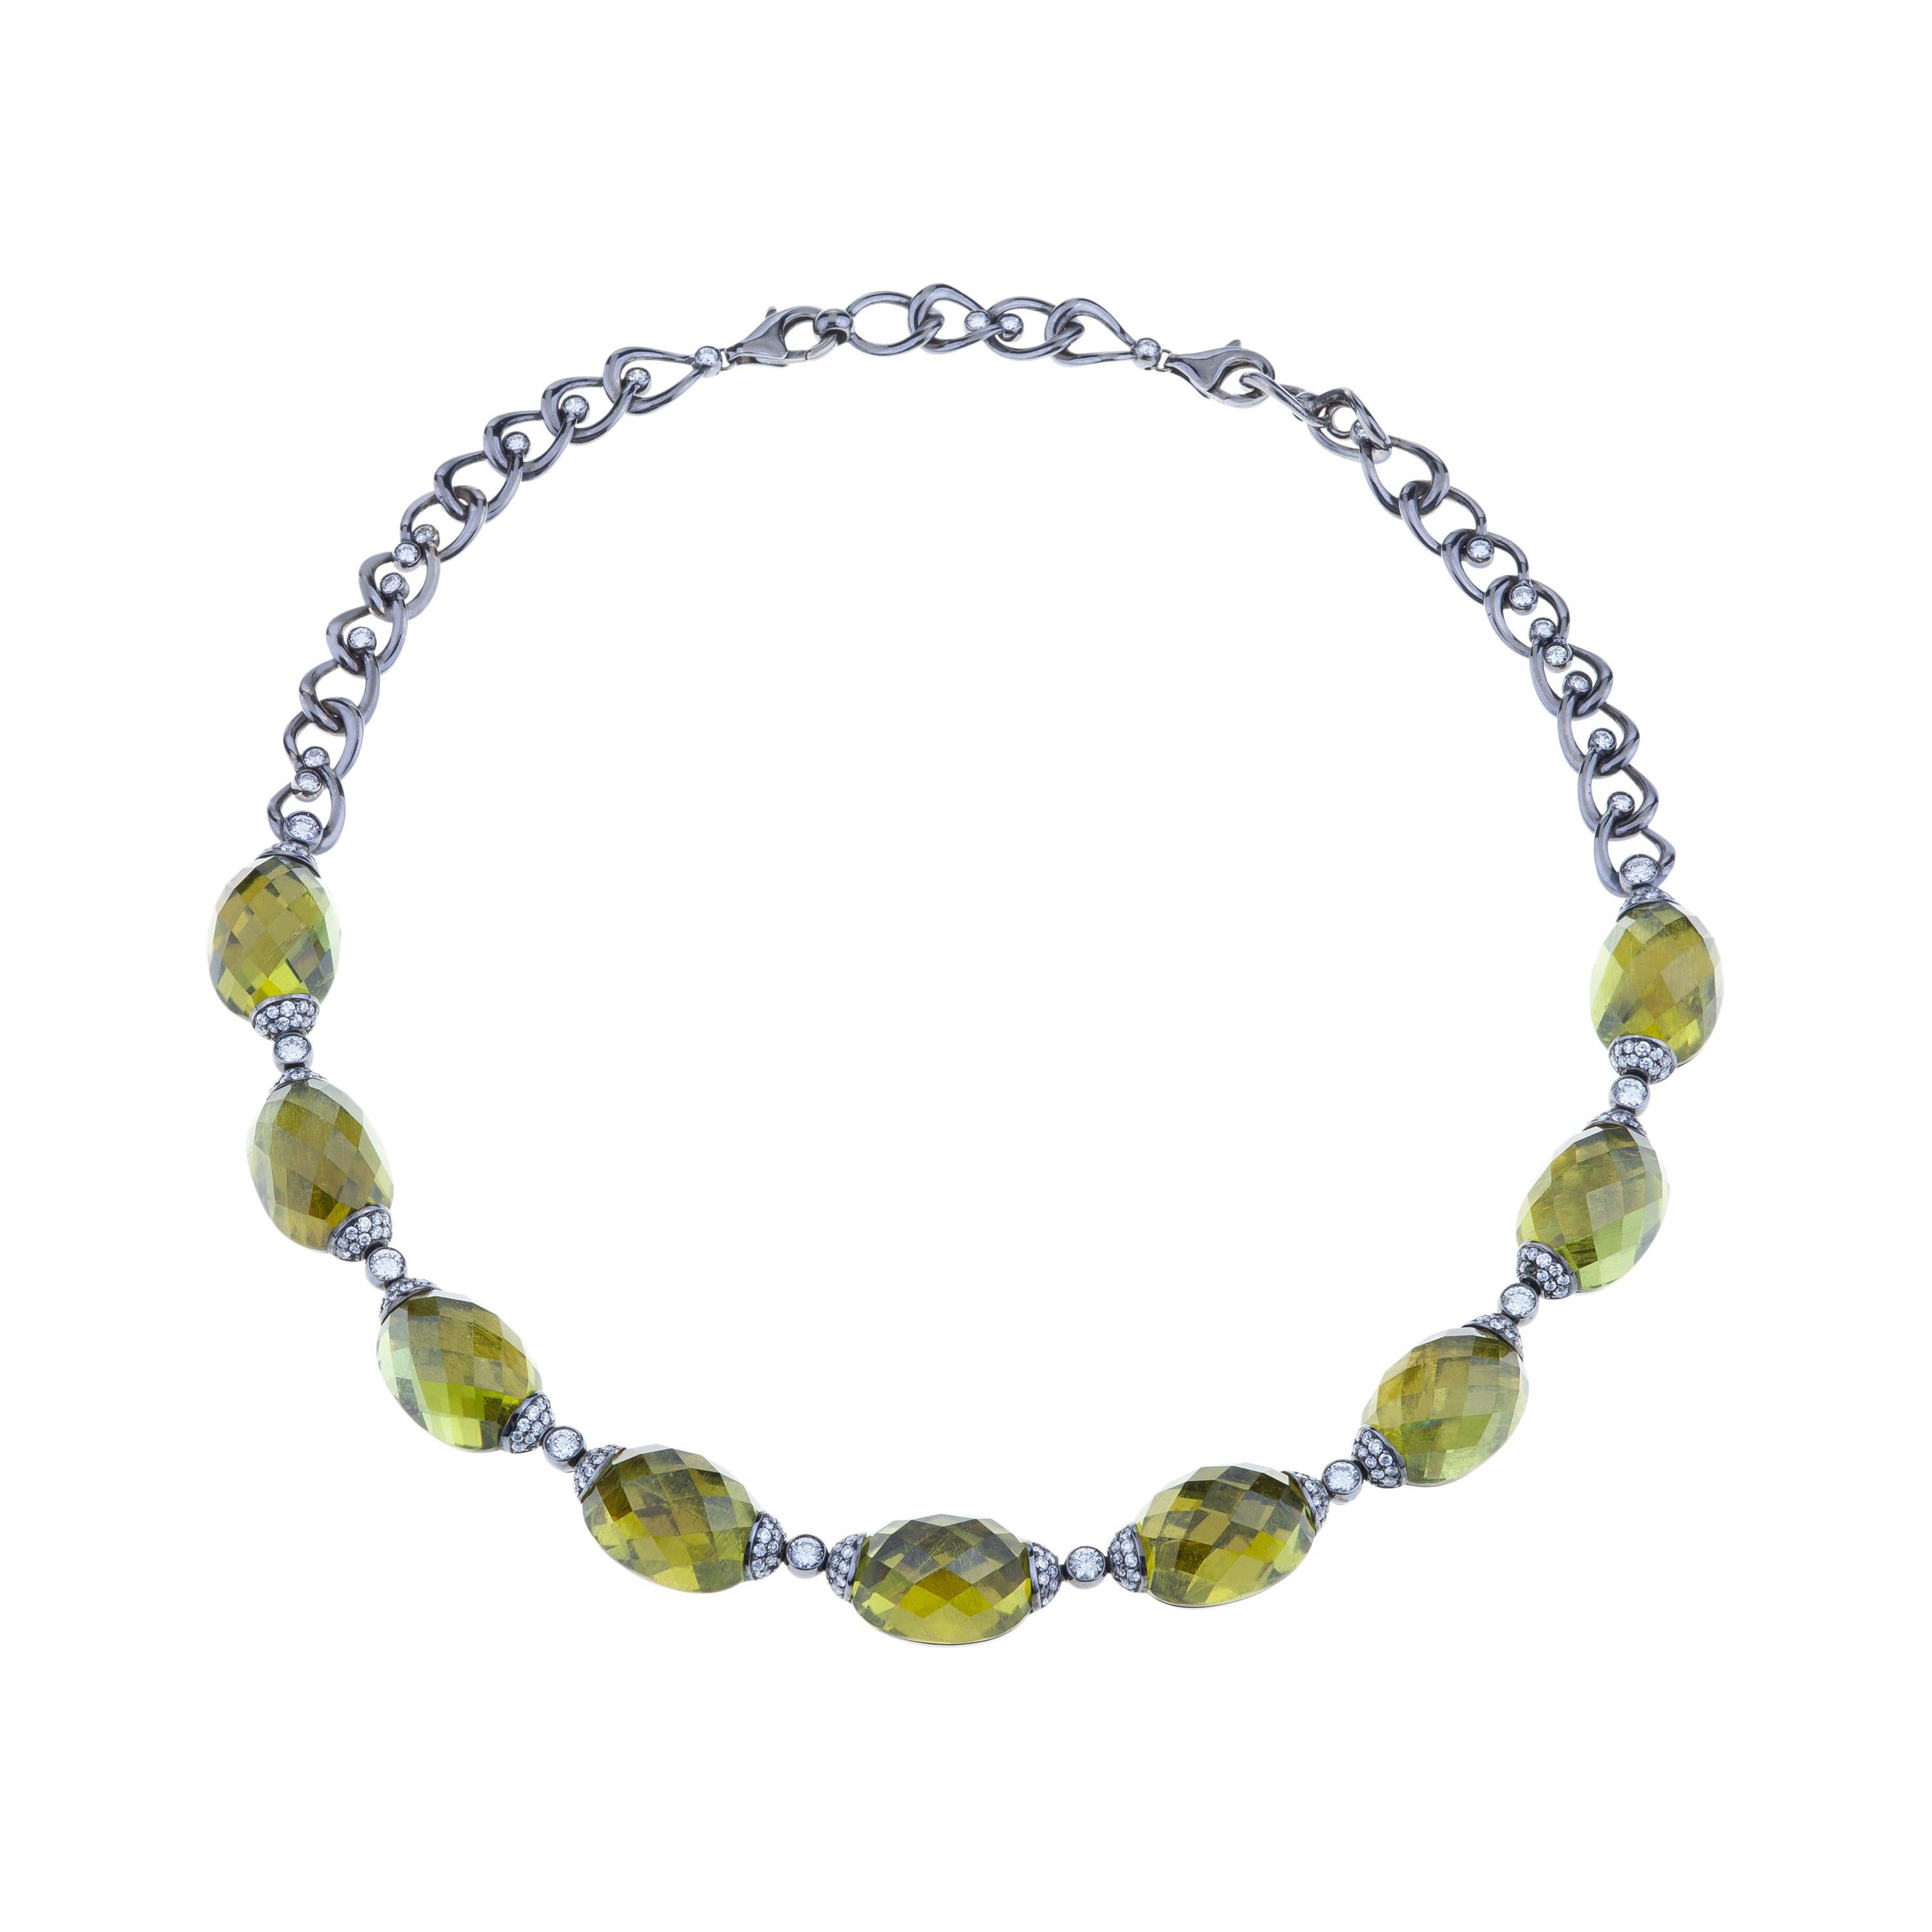 Embrace Faceted Light Green Tourmaline From Unique Stone, Diamonds For Sale